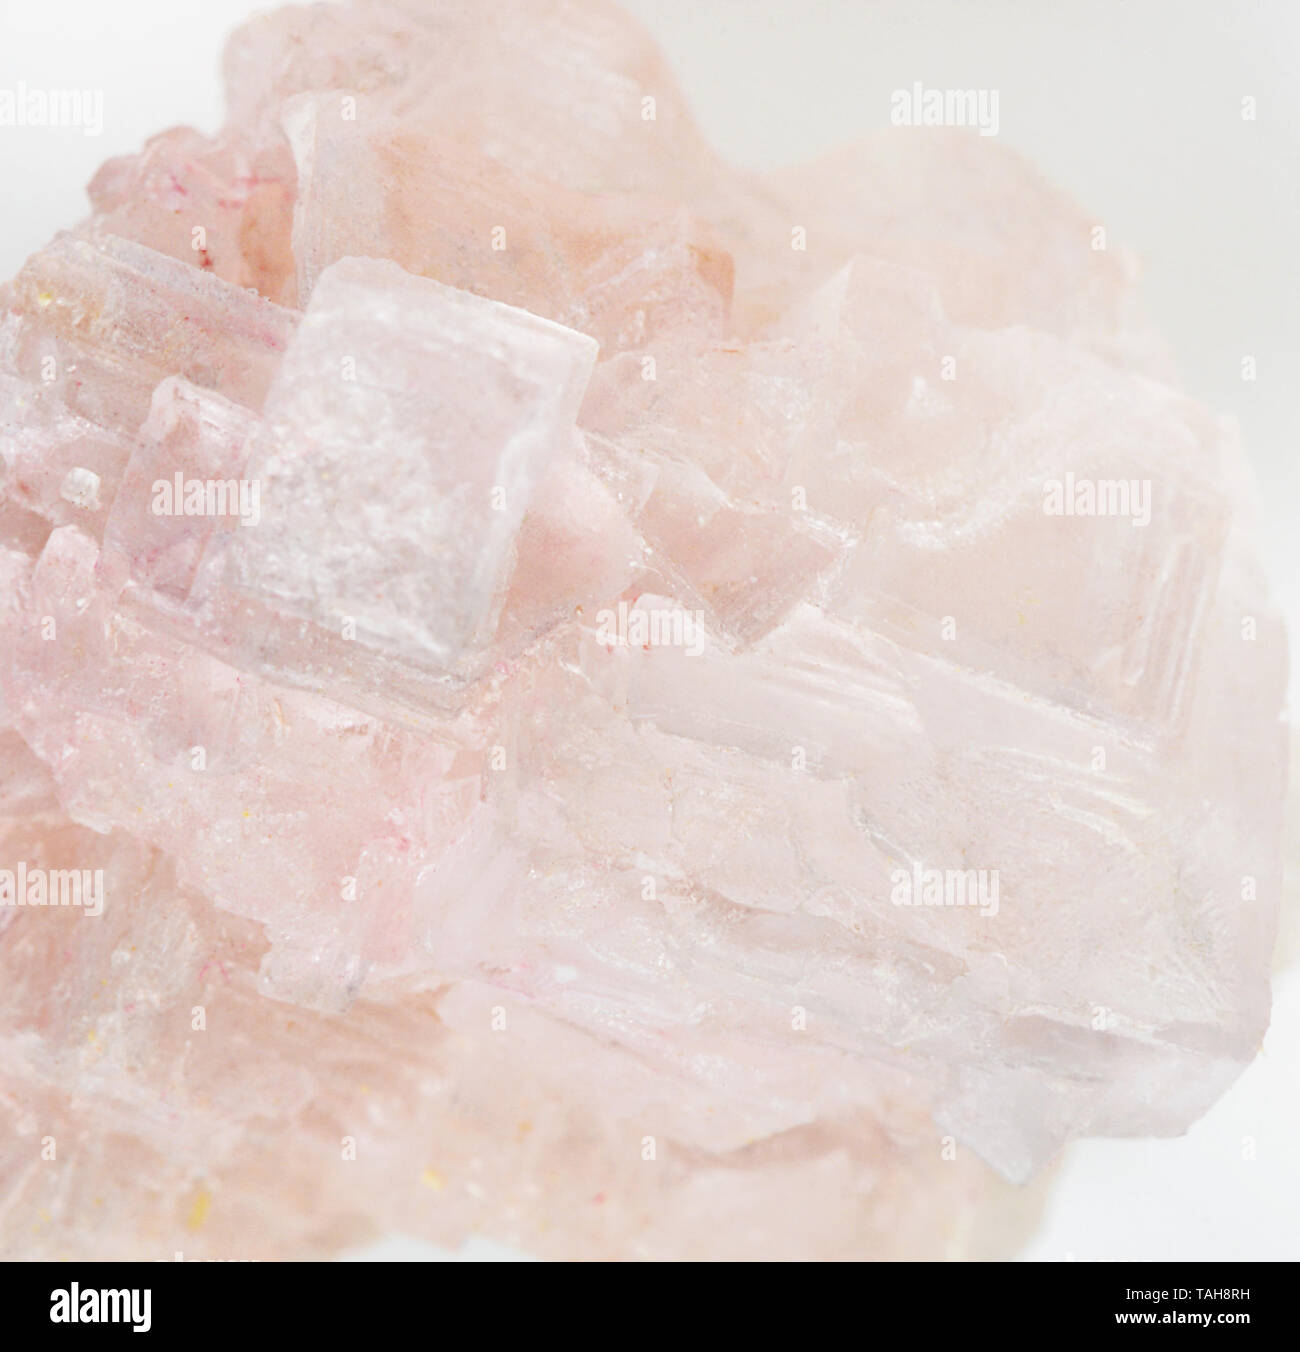 Pink crystals of halite mineral - natural pink table salt Stock Photo